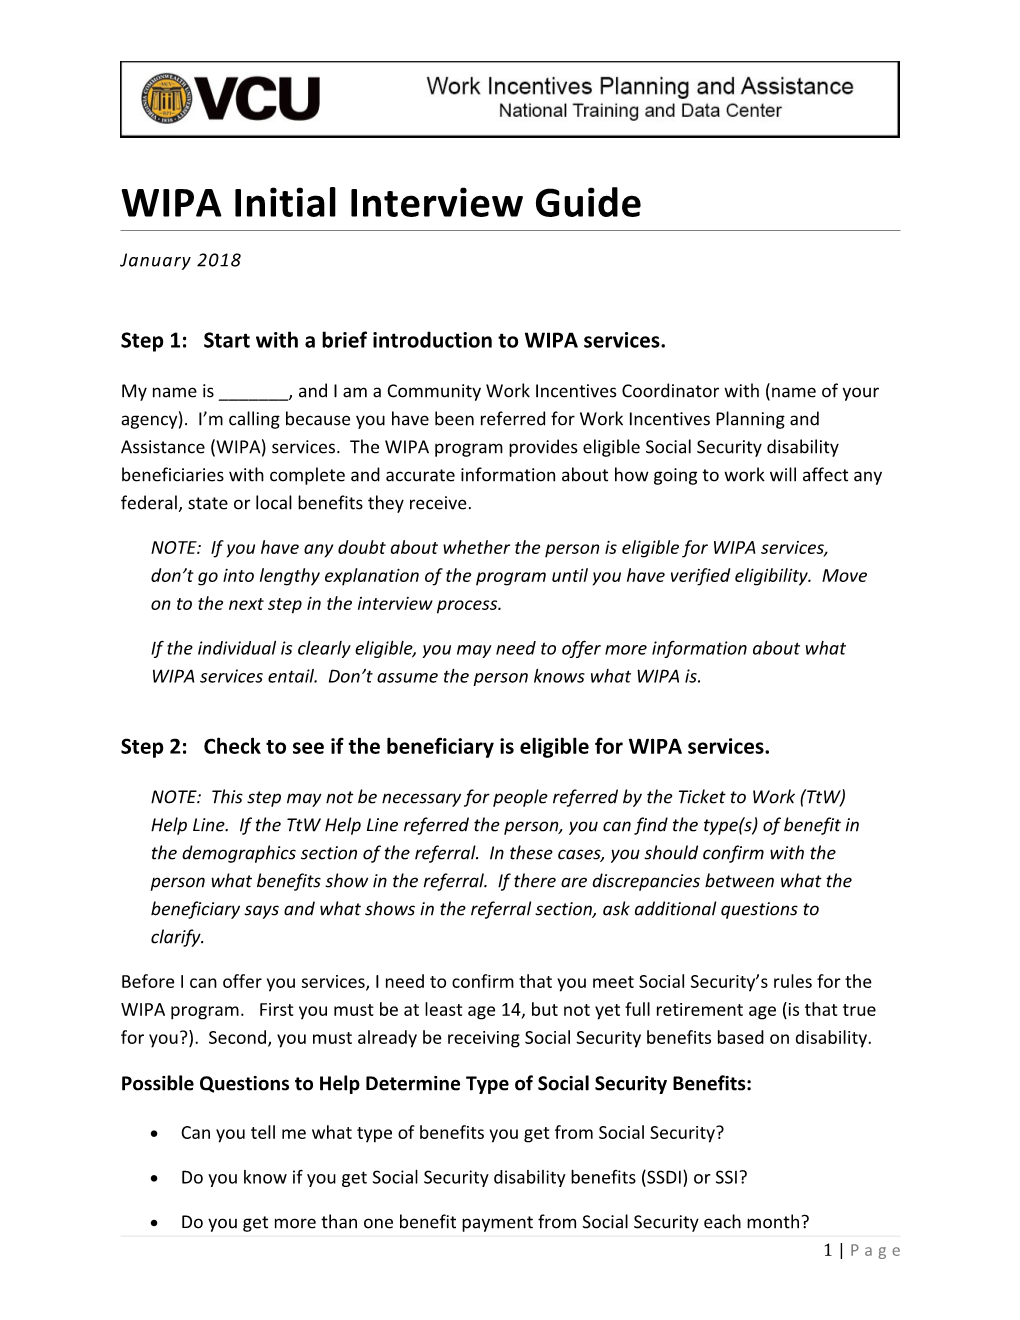 Step 1: Start with a Briefintroduction to WIPA Services